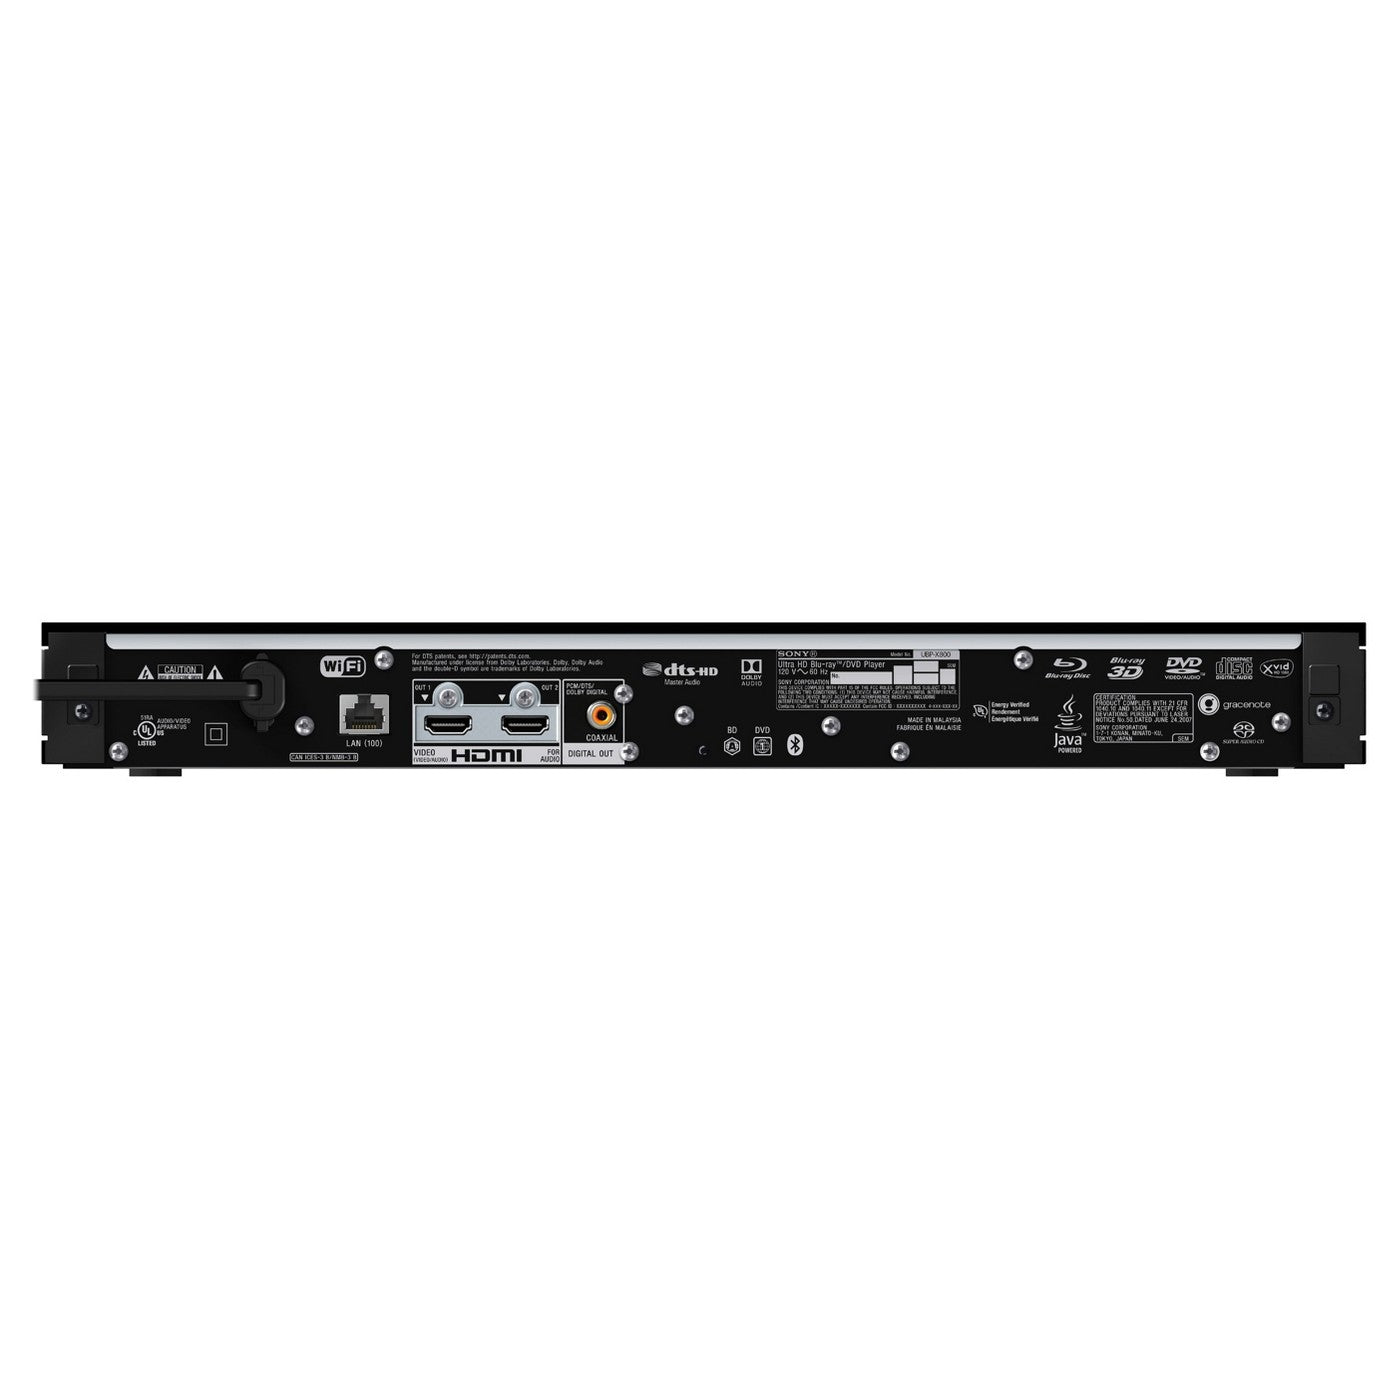 Sony UBPX700/M 4K Ultra HD Blu-ray Player with Dolby Atmos in Black